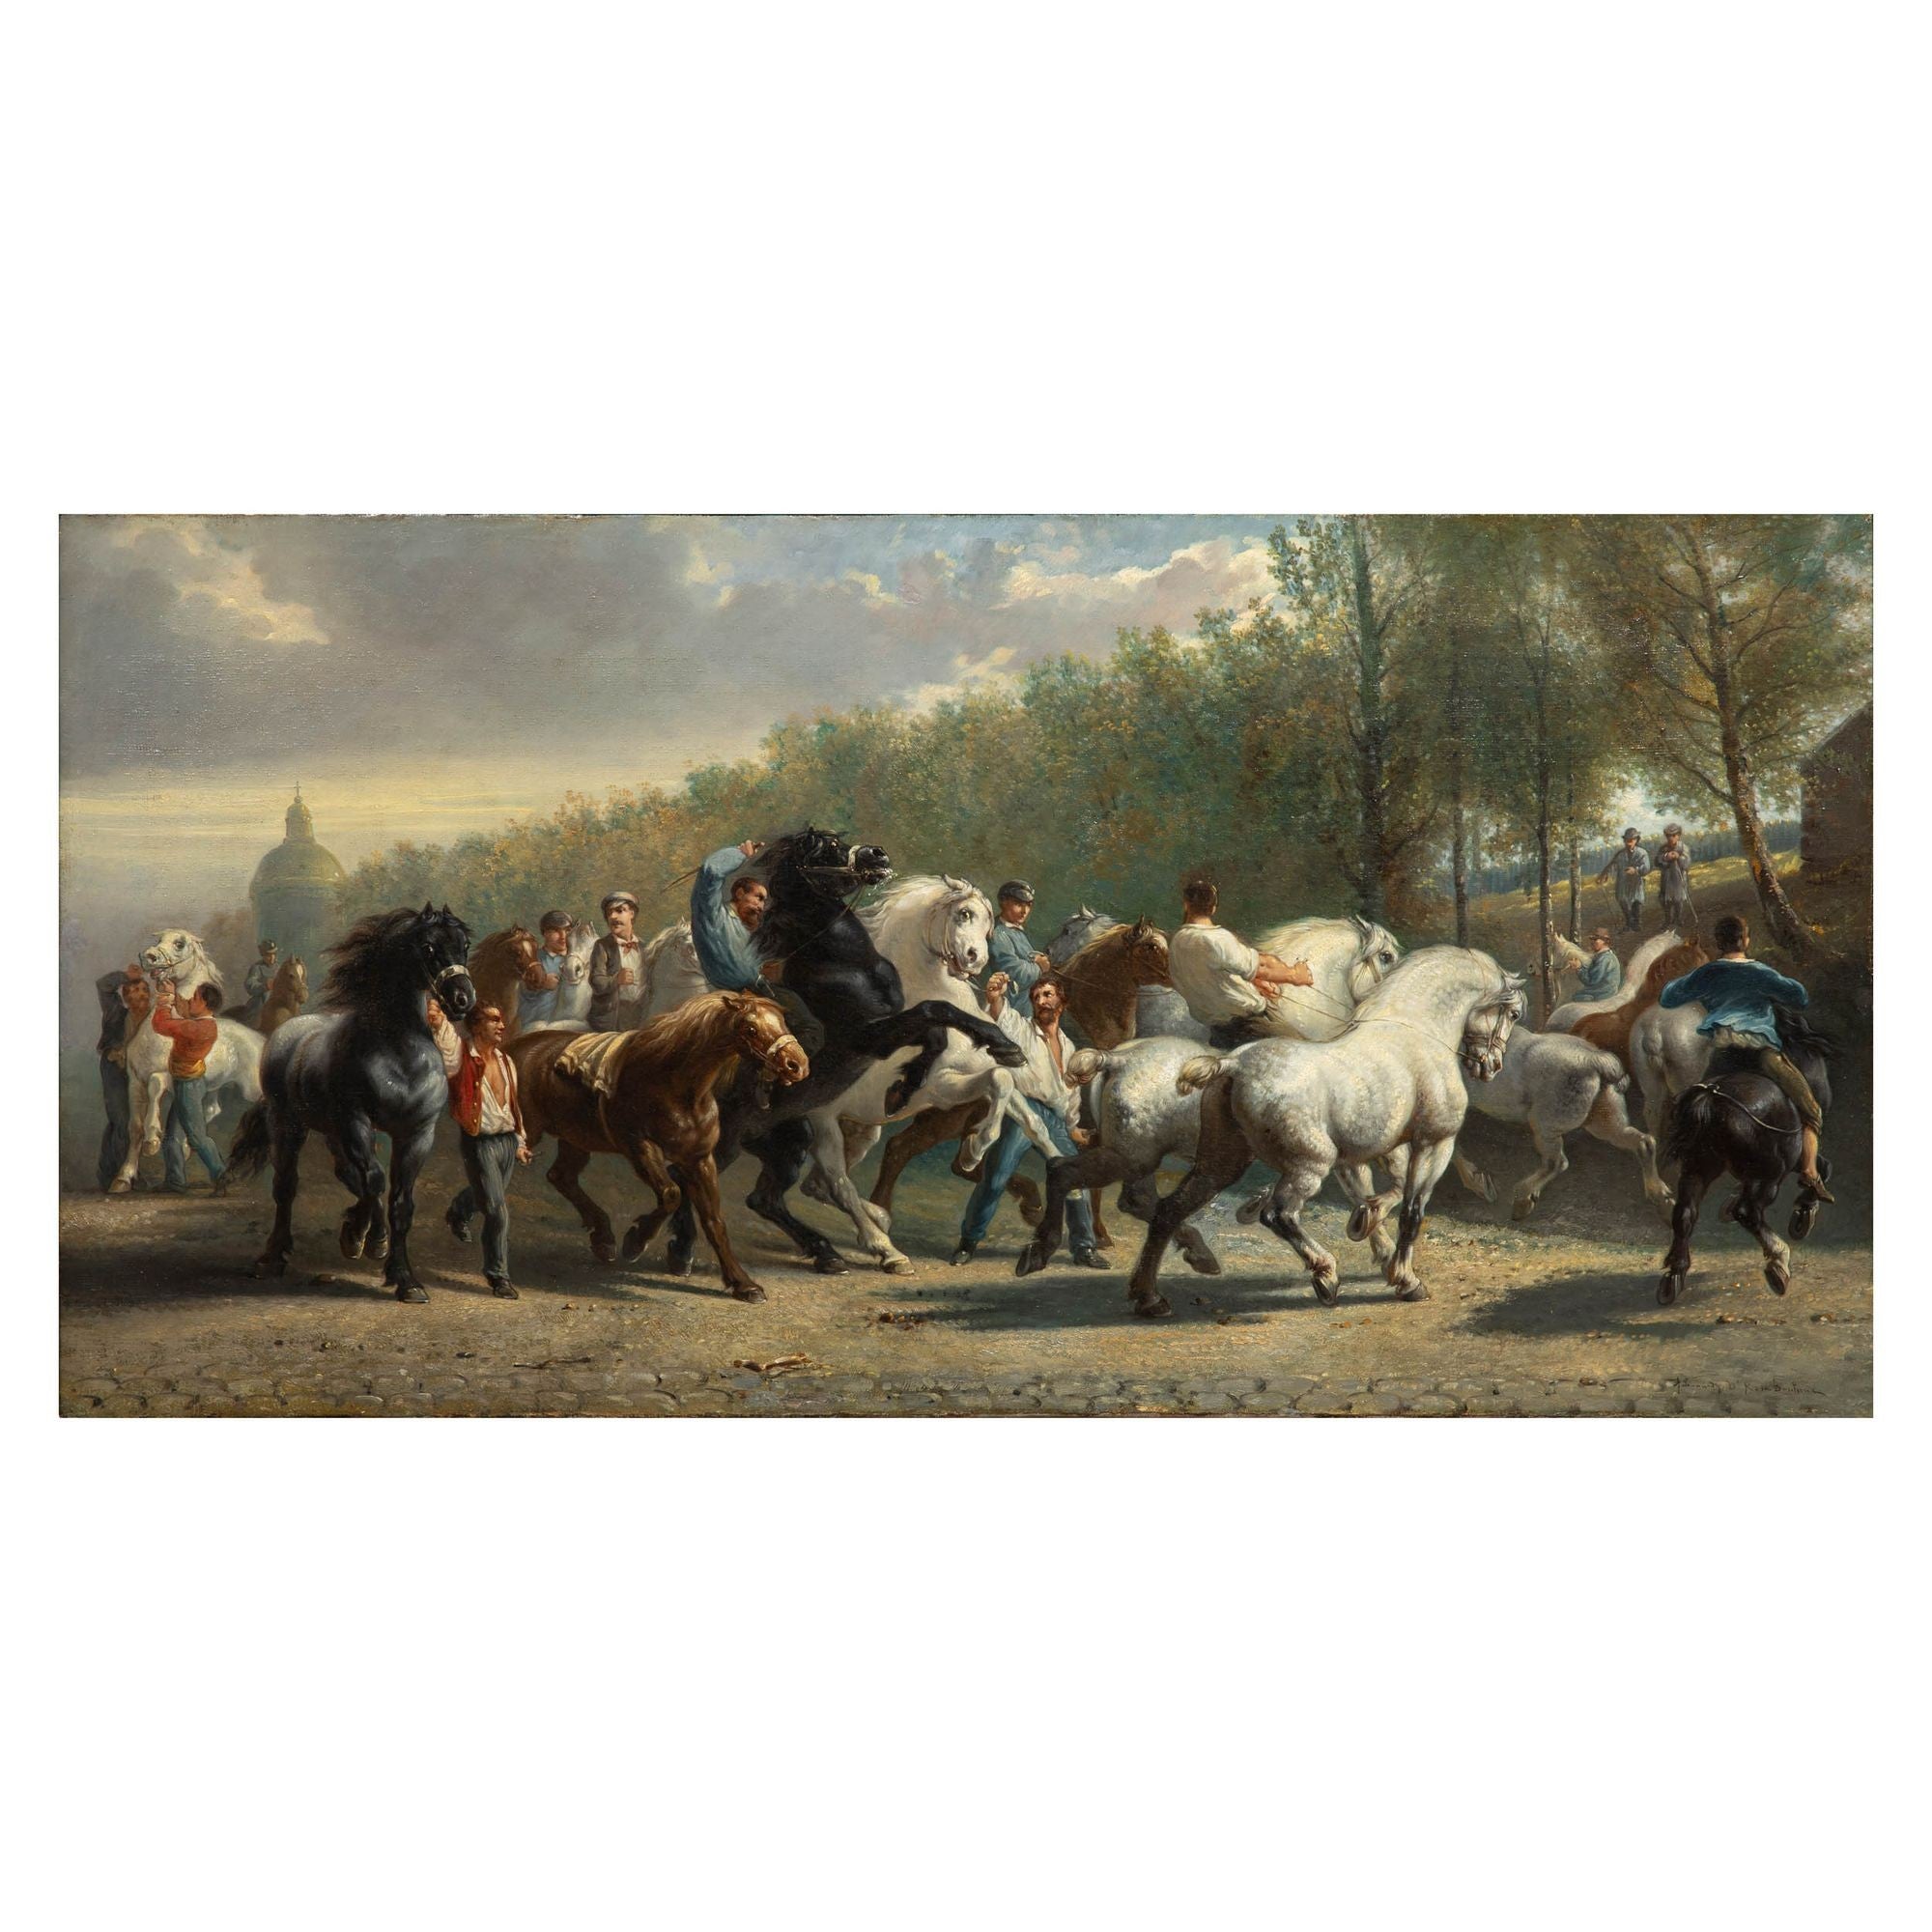 Late 19th Century French Copy of Rosa Bonheur’s “Horse Fair” Painting